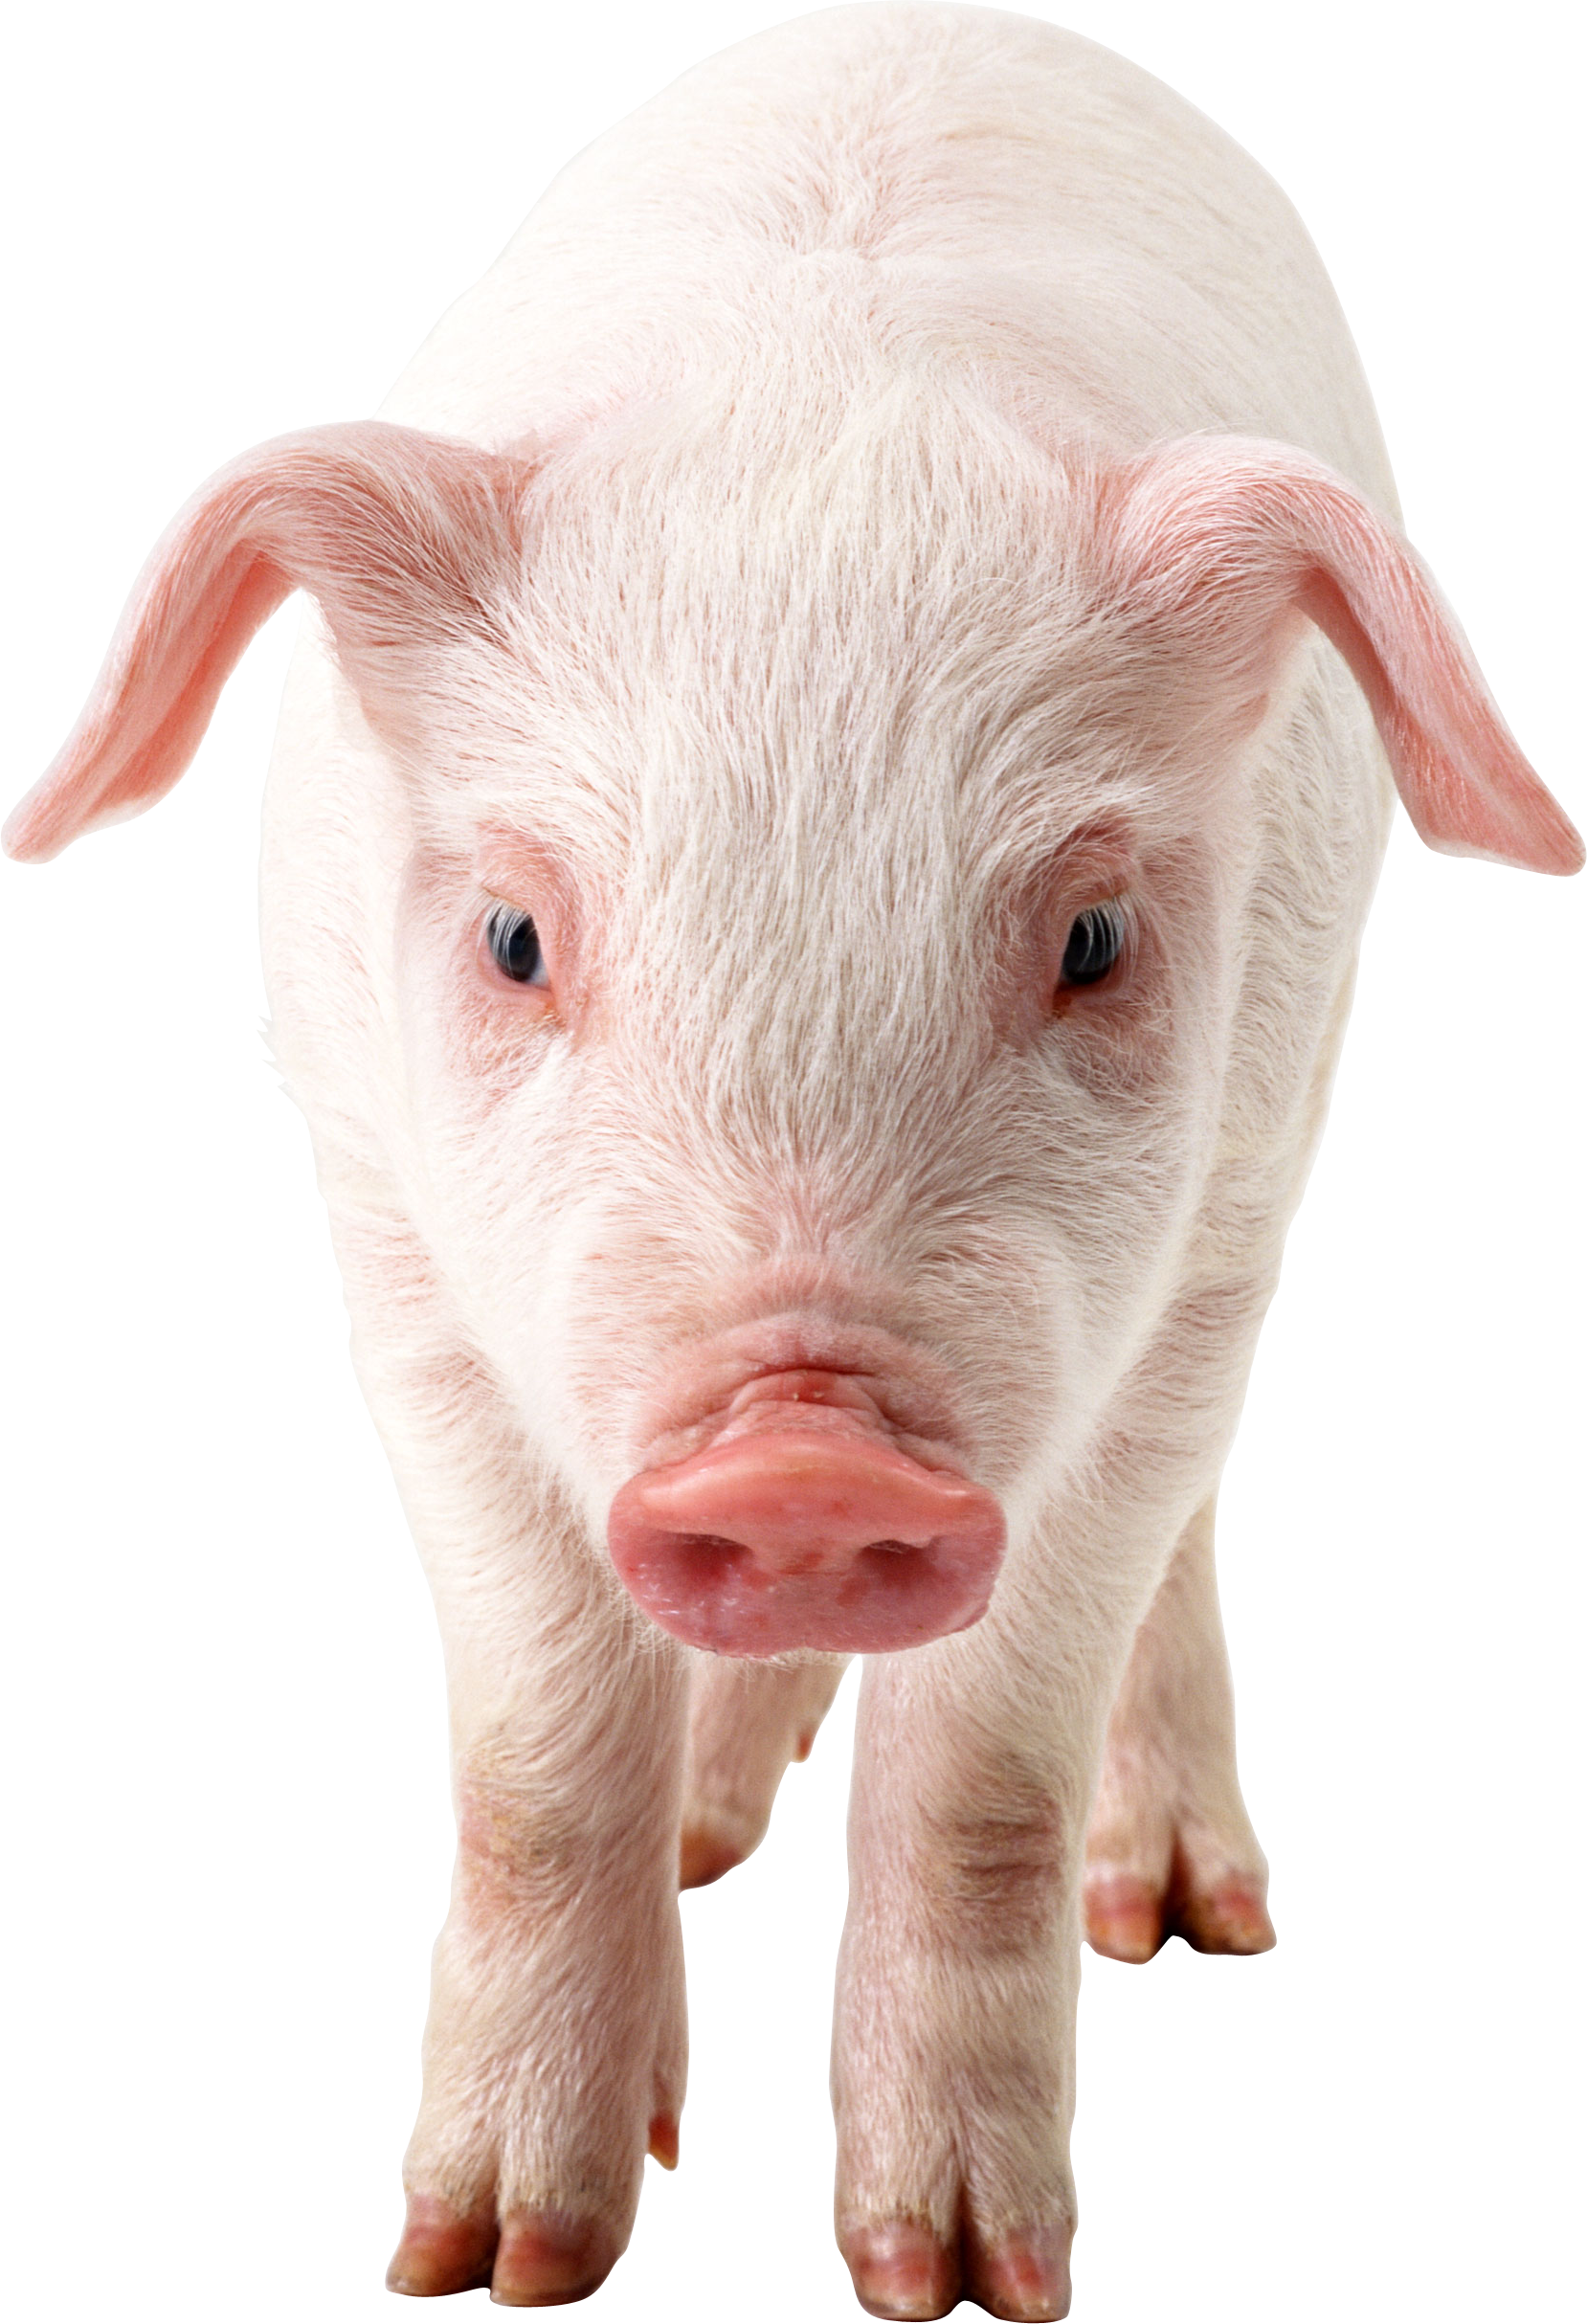 Pig frontview PNG Image